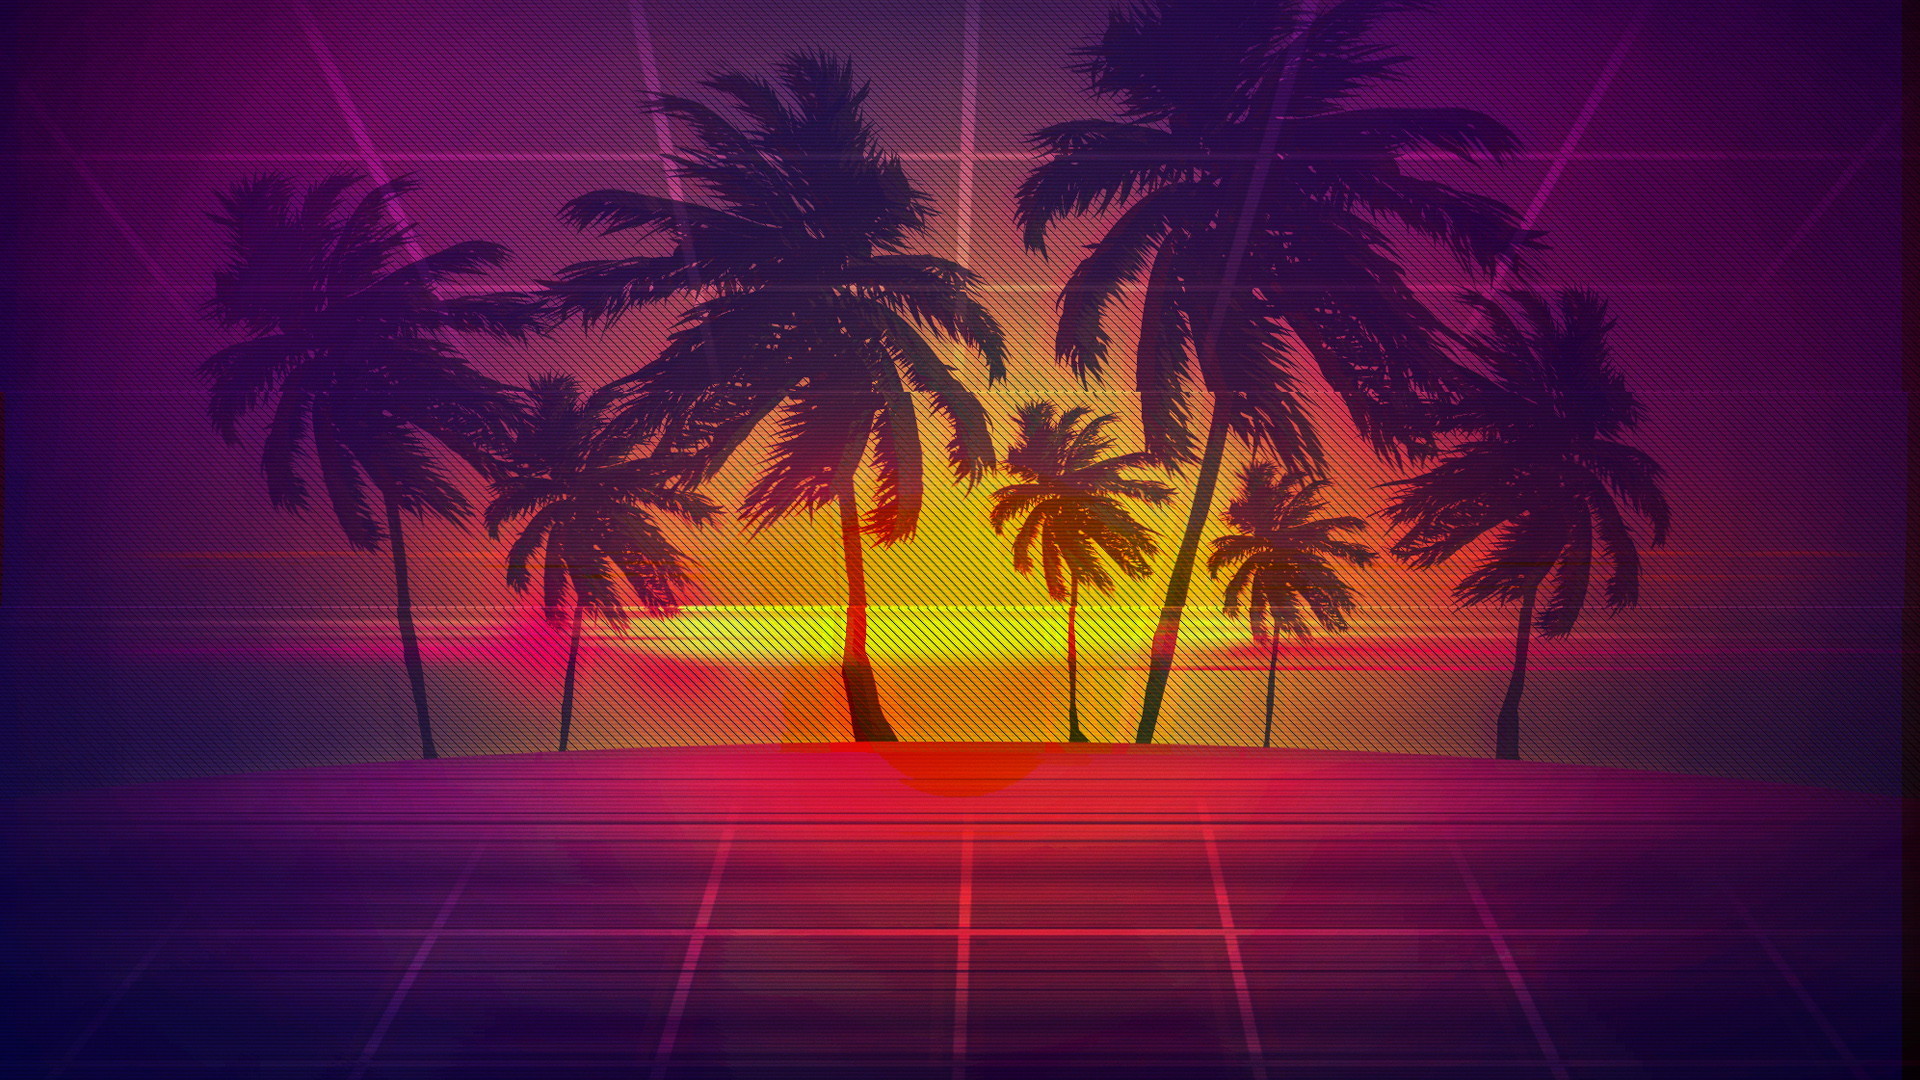 1920x1080 Miami HD Wallpapers Free Download › Unique 100% Quality HD Photos